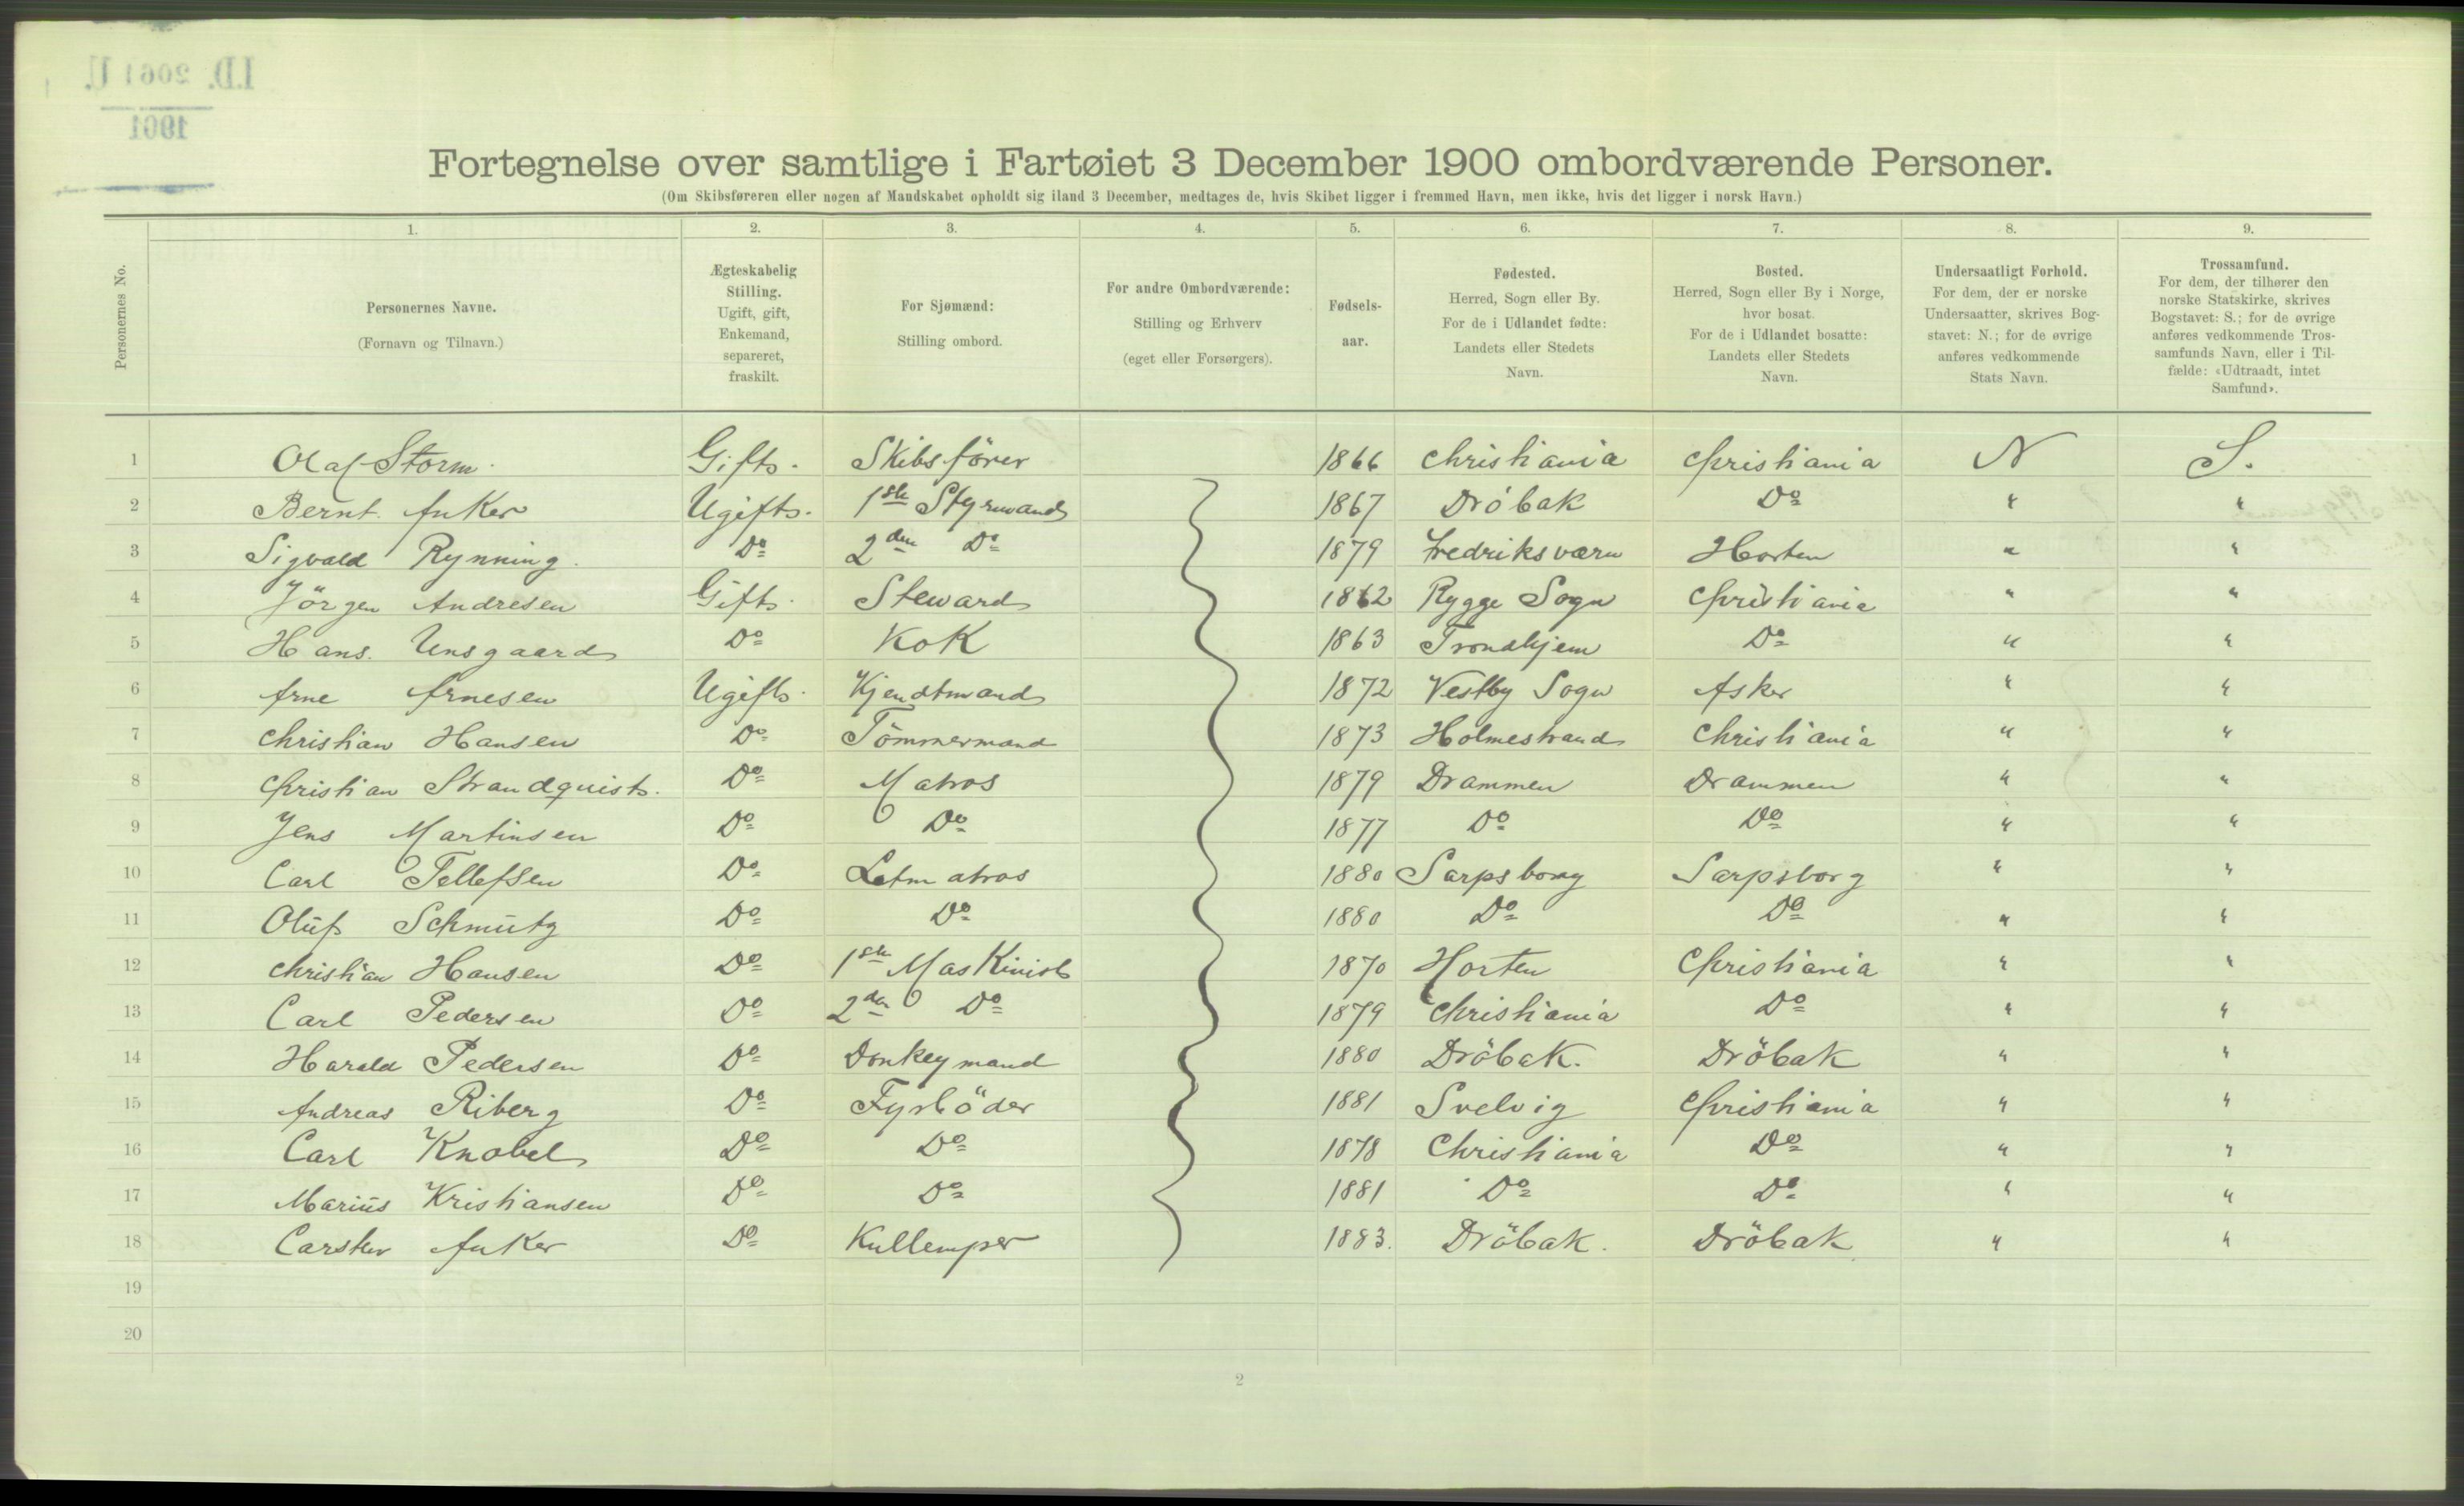 RA, 1900 Census - ship lists from ships in Norwegian harbours, harbours abroad and at sea, 1900, p. 4692